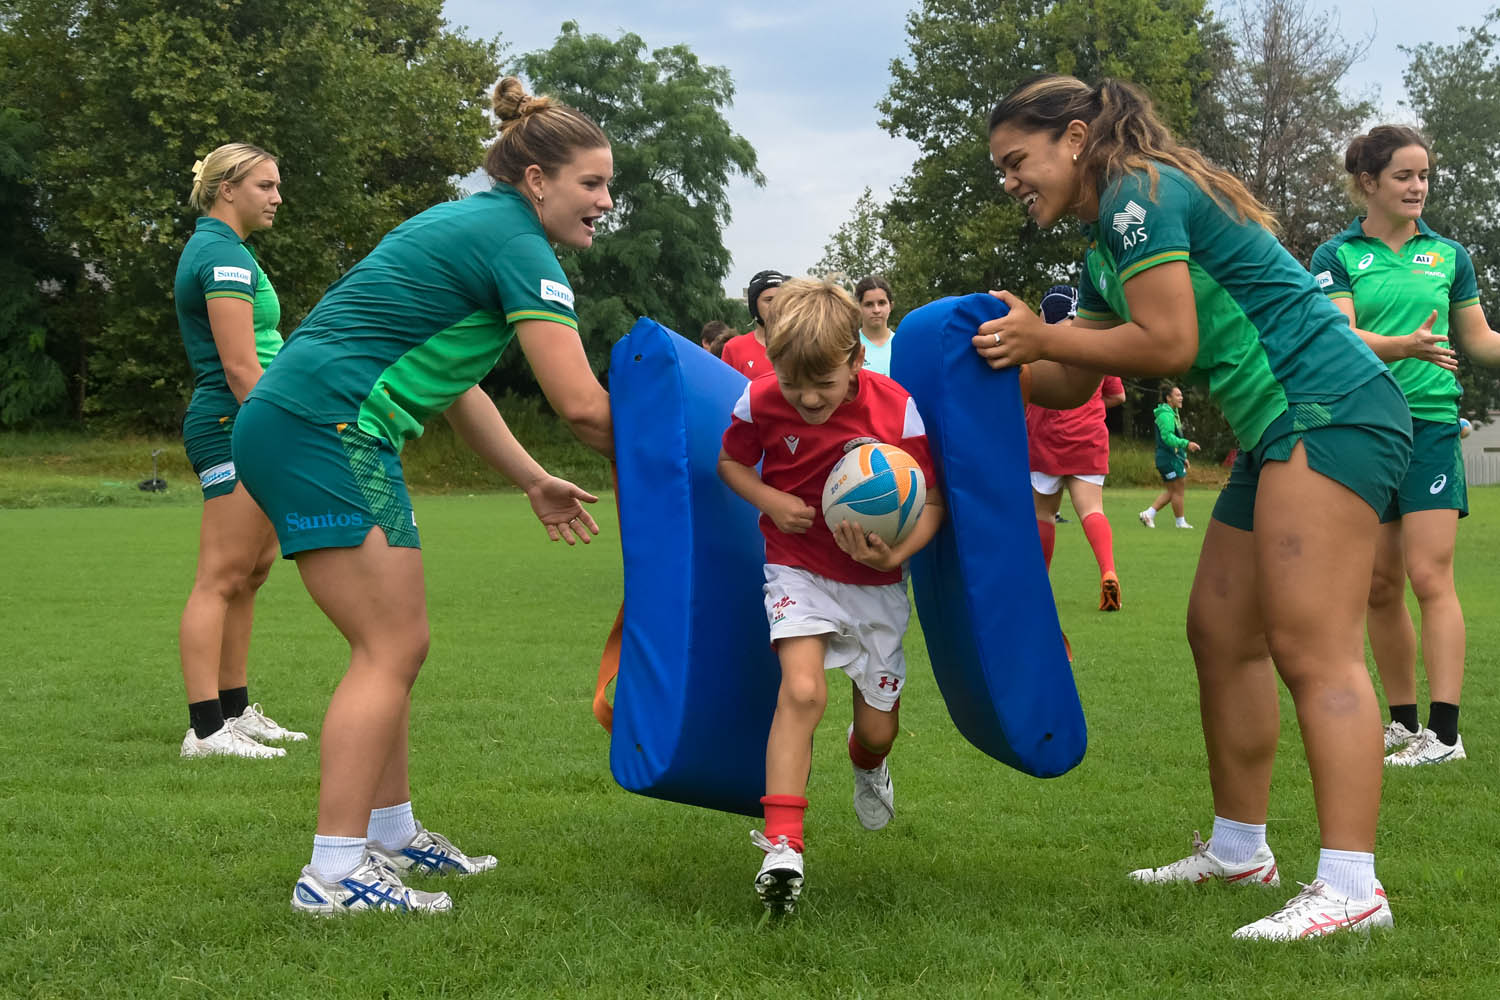 A young boy holding a rugby ball runs between two Australian rugby 7s players hold up tackle pads.